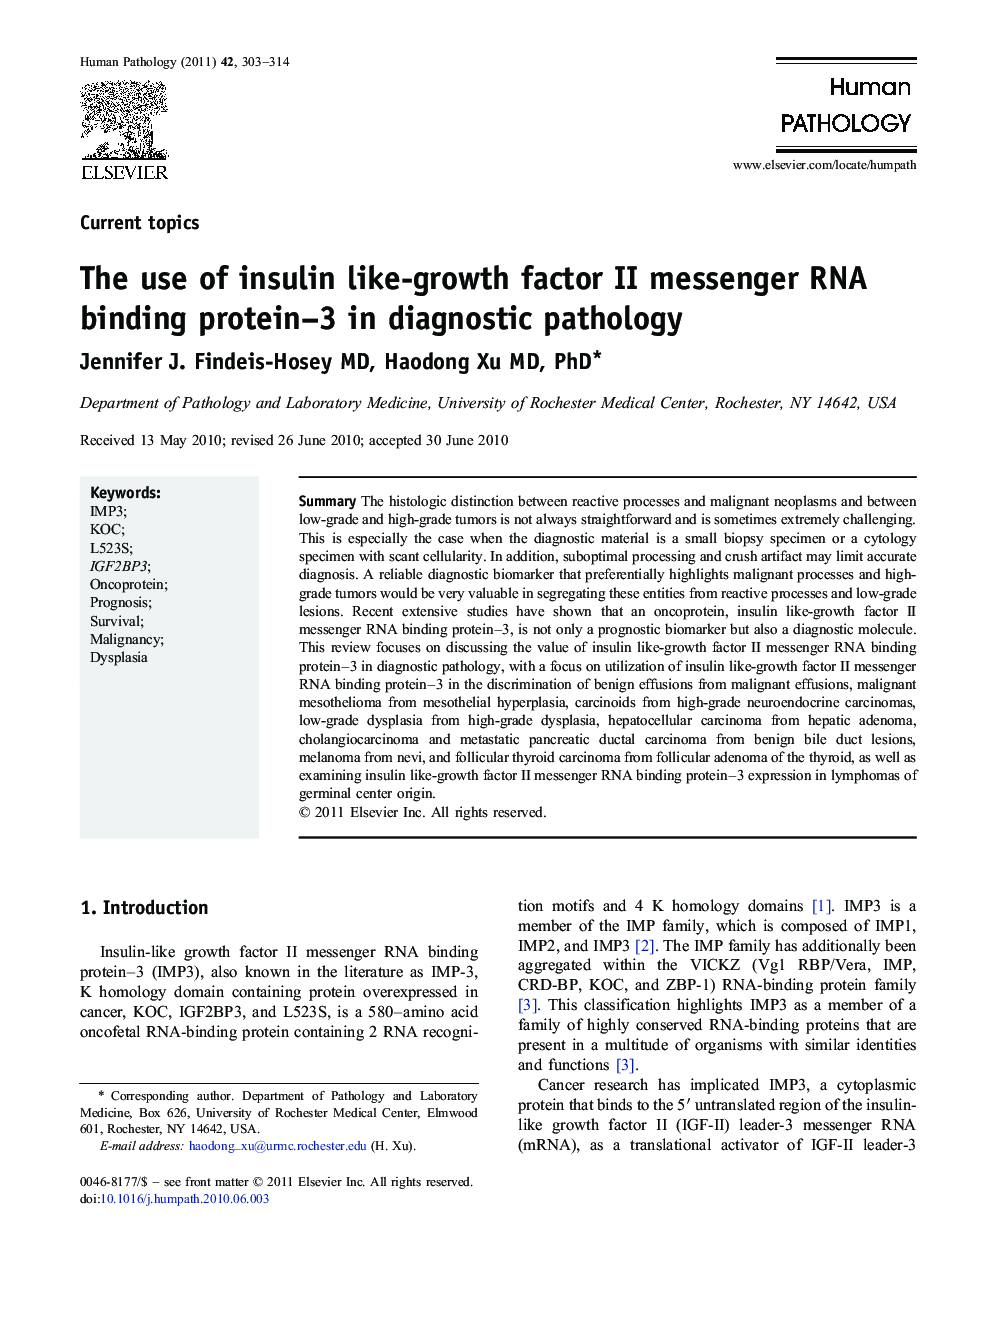 The use of insulin like-growth factor II messenger RNA binding protein–3 in diagnostic pathology